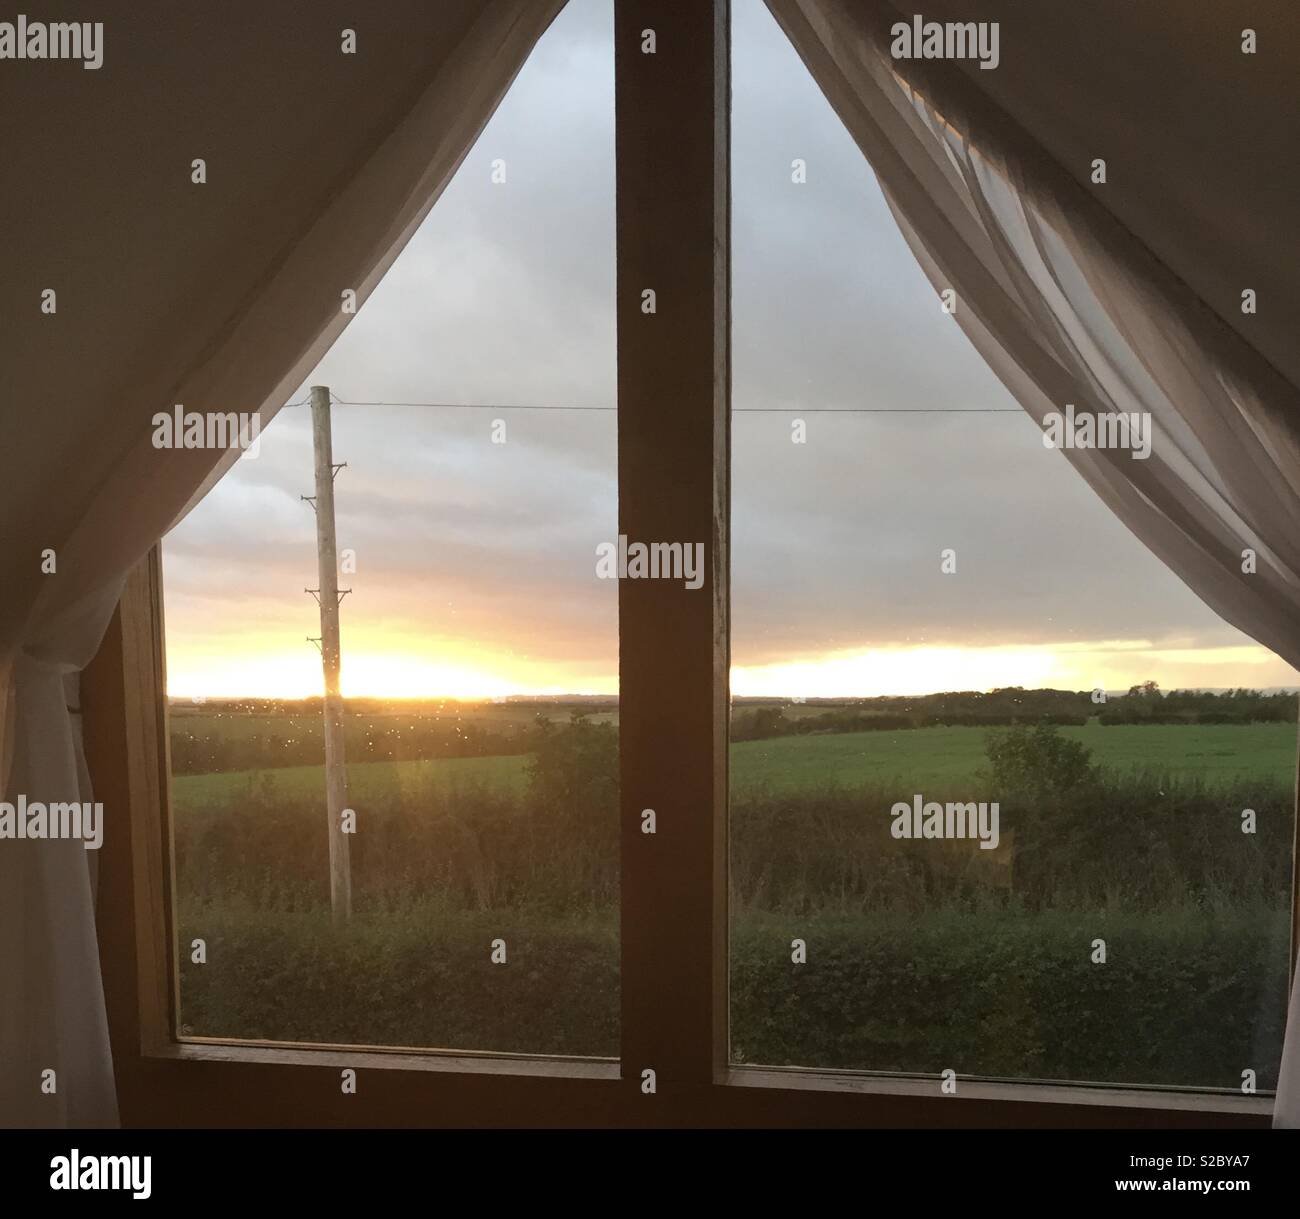 Sunset view from bedroom window in the UK countryside. Stock Photo